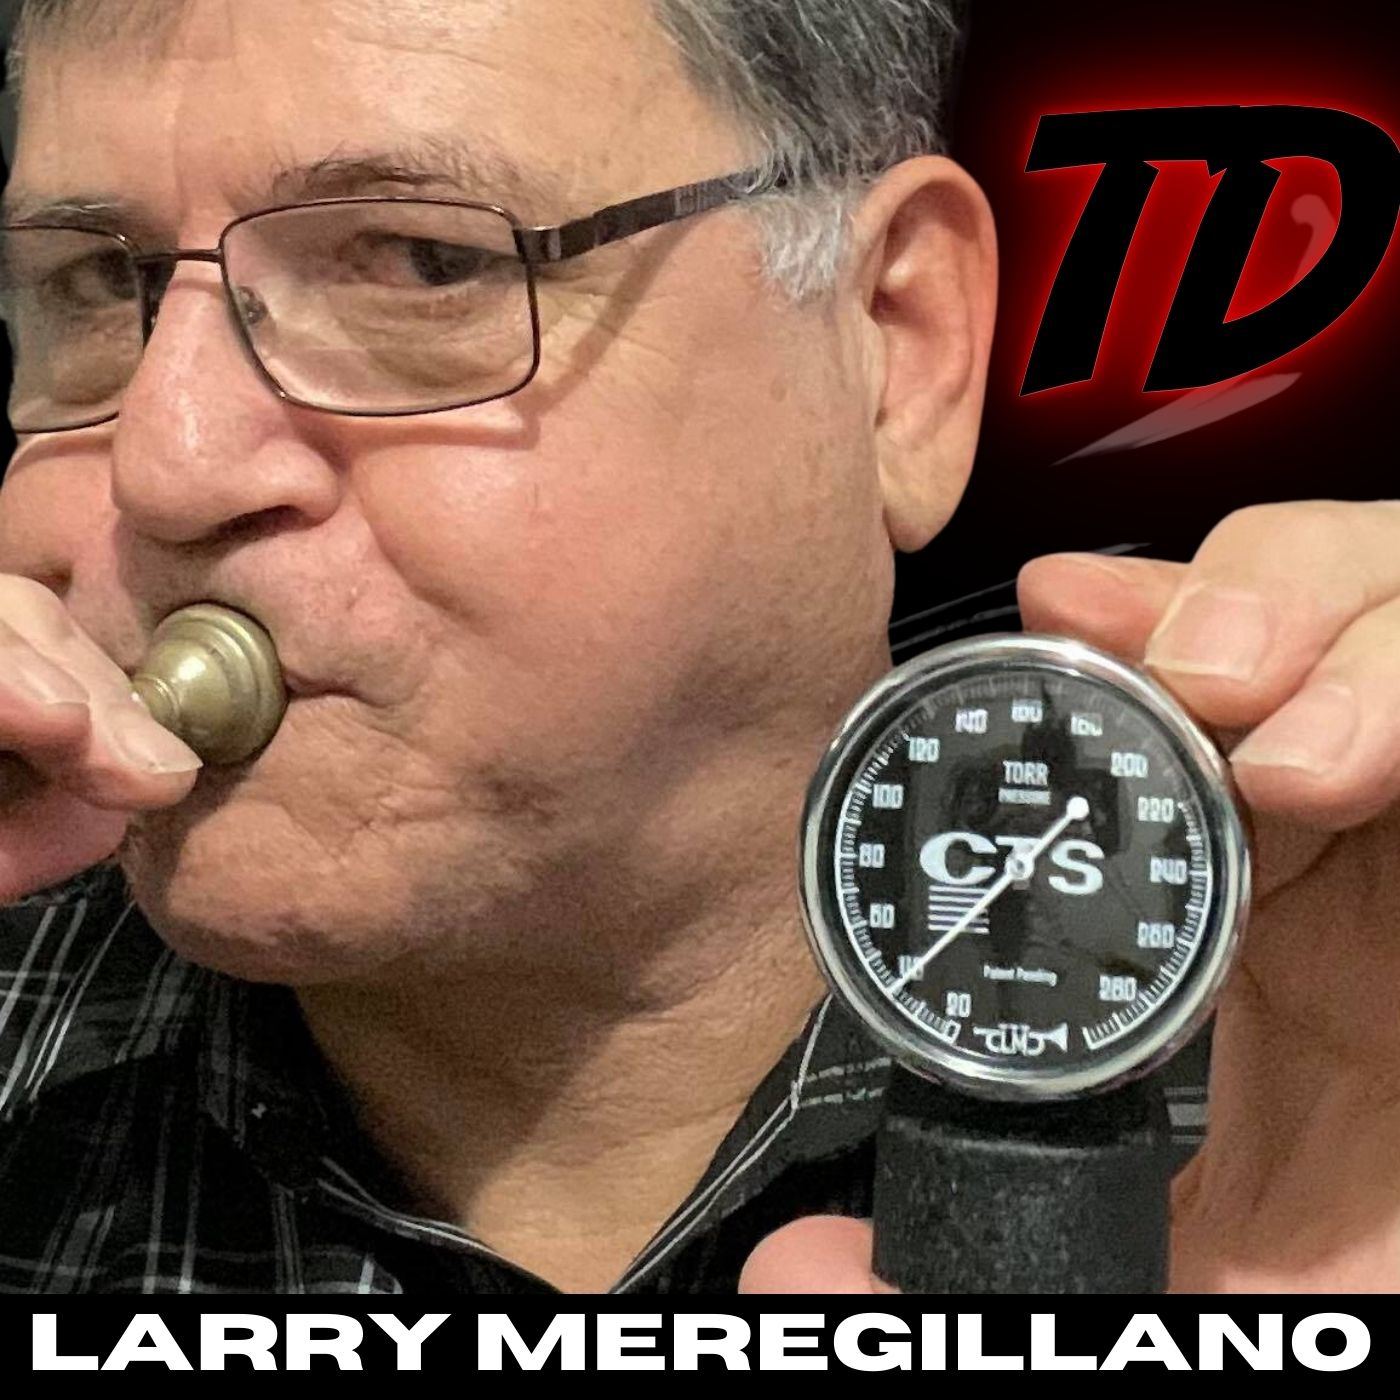 Trumpet Endurance, and All About the New Compression Measurement Tool That’s Taking The Brass World by Storm with Larry Meregillano